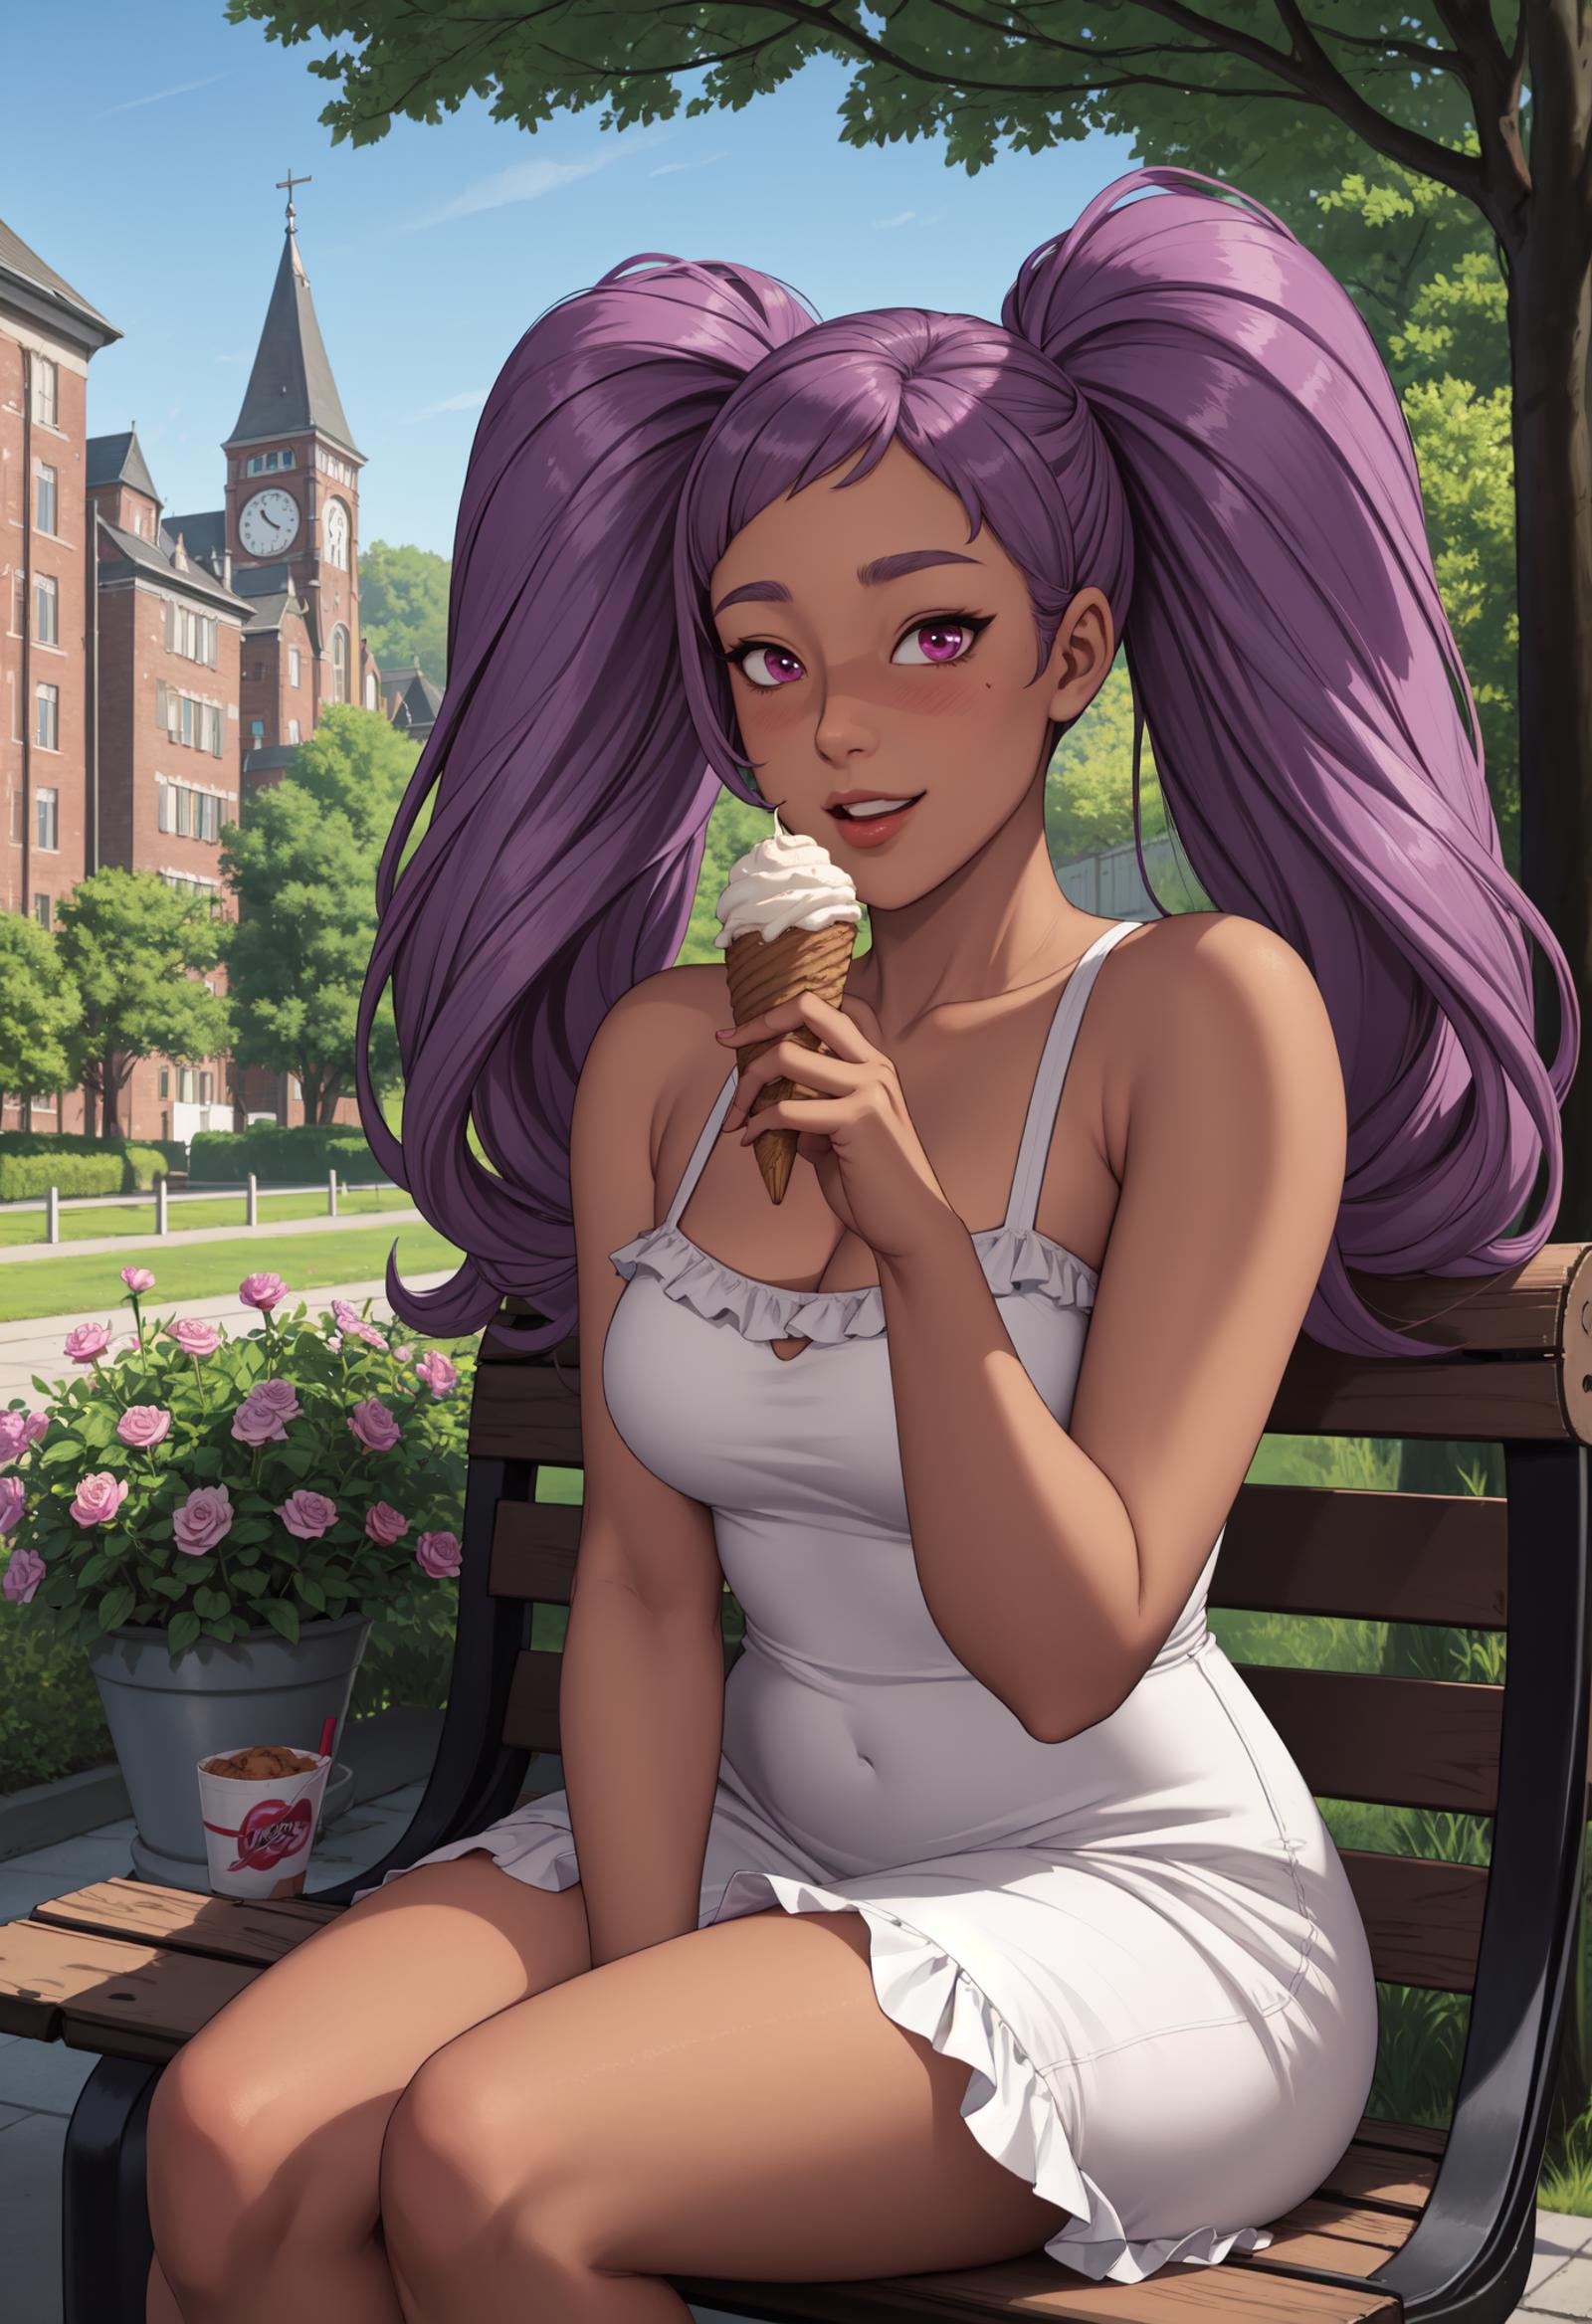 Entrapta from She-ra image by Nitram